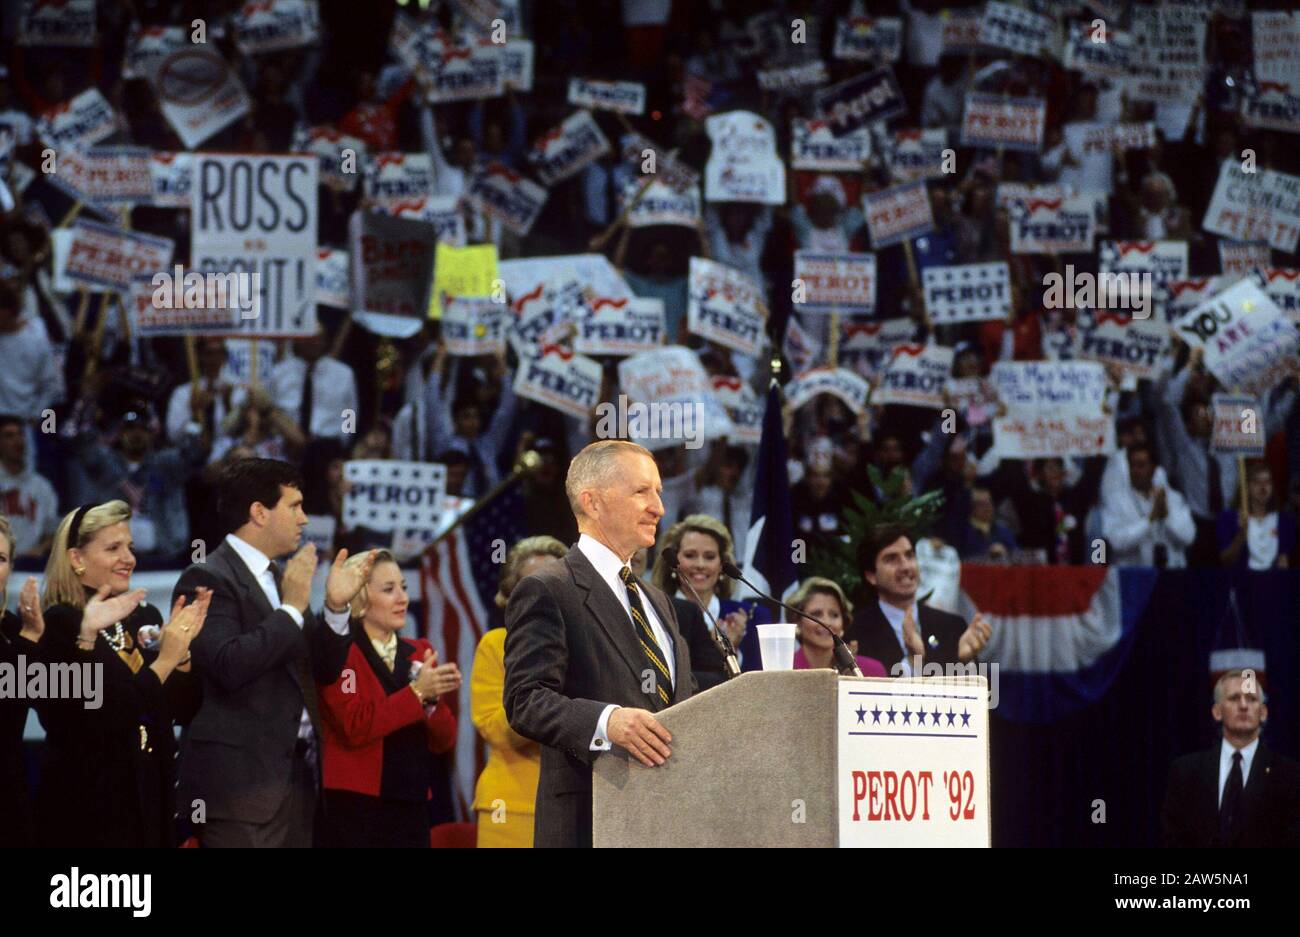 Dallas, Texas:  Technology billionaire and political neophyte Ross Perot, running for president as a third-party candidate in 1992 against Republican incumbent George Bush and Democrat Bill Clinton, at a campaign rally at Reunion Arena.  ©Bob Daemmrich Stock Photo